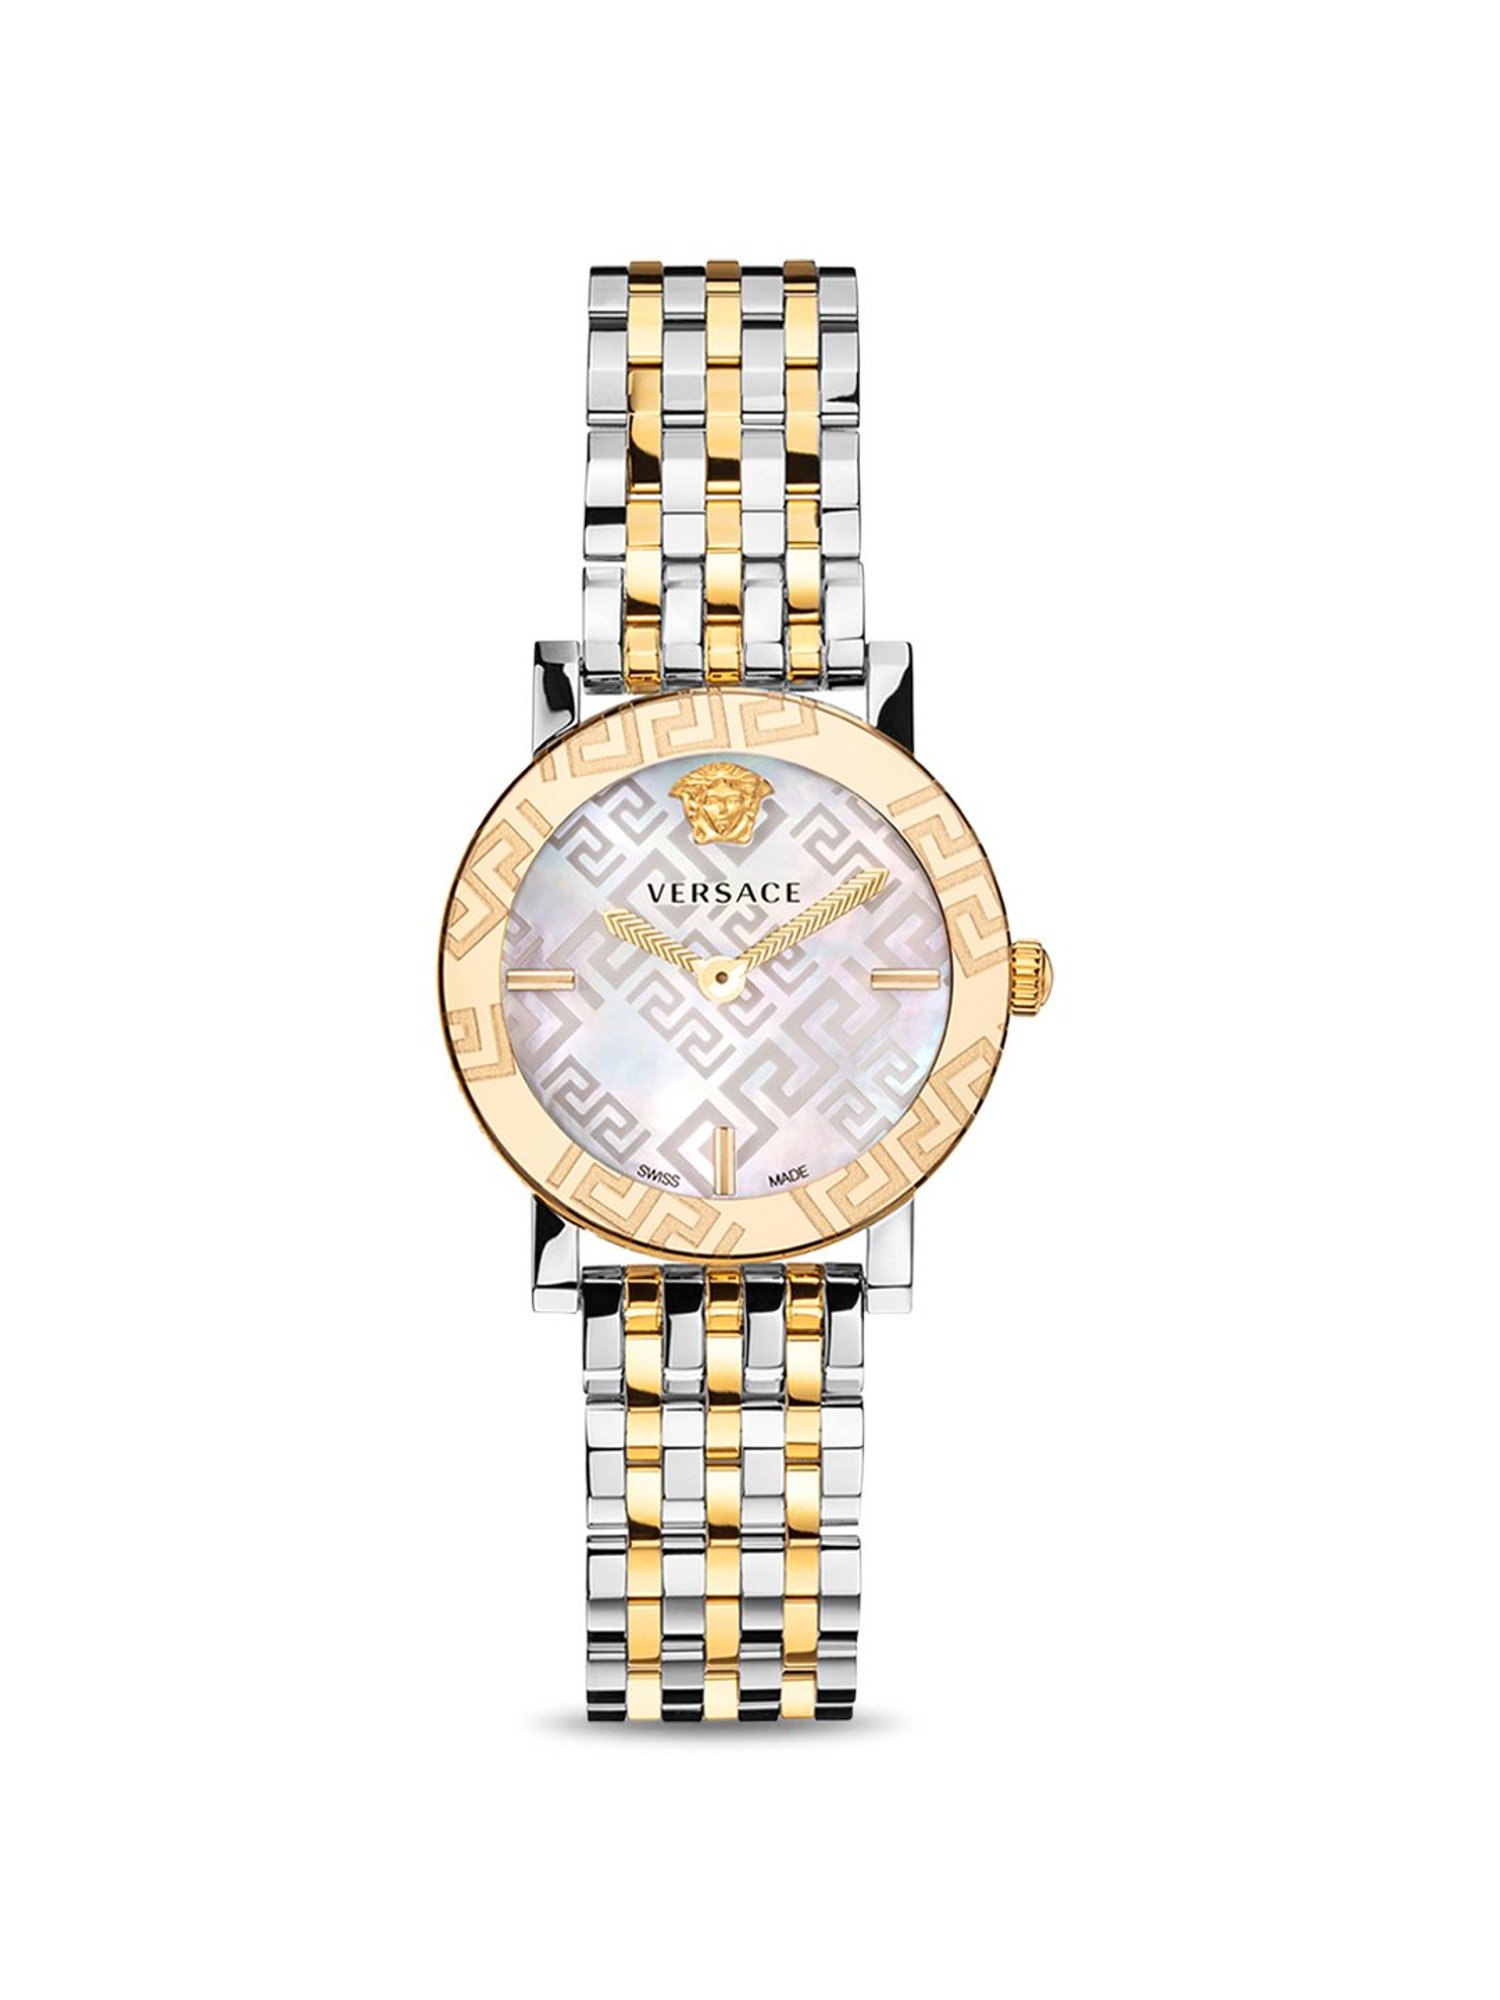 Versace Dominus Chronograph Silicone Strap Watch, 42mm | Nordstrom